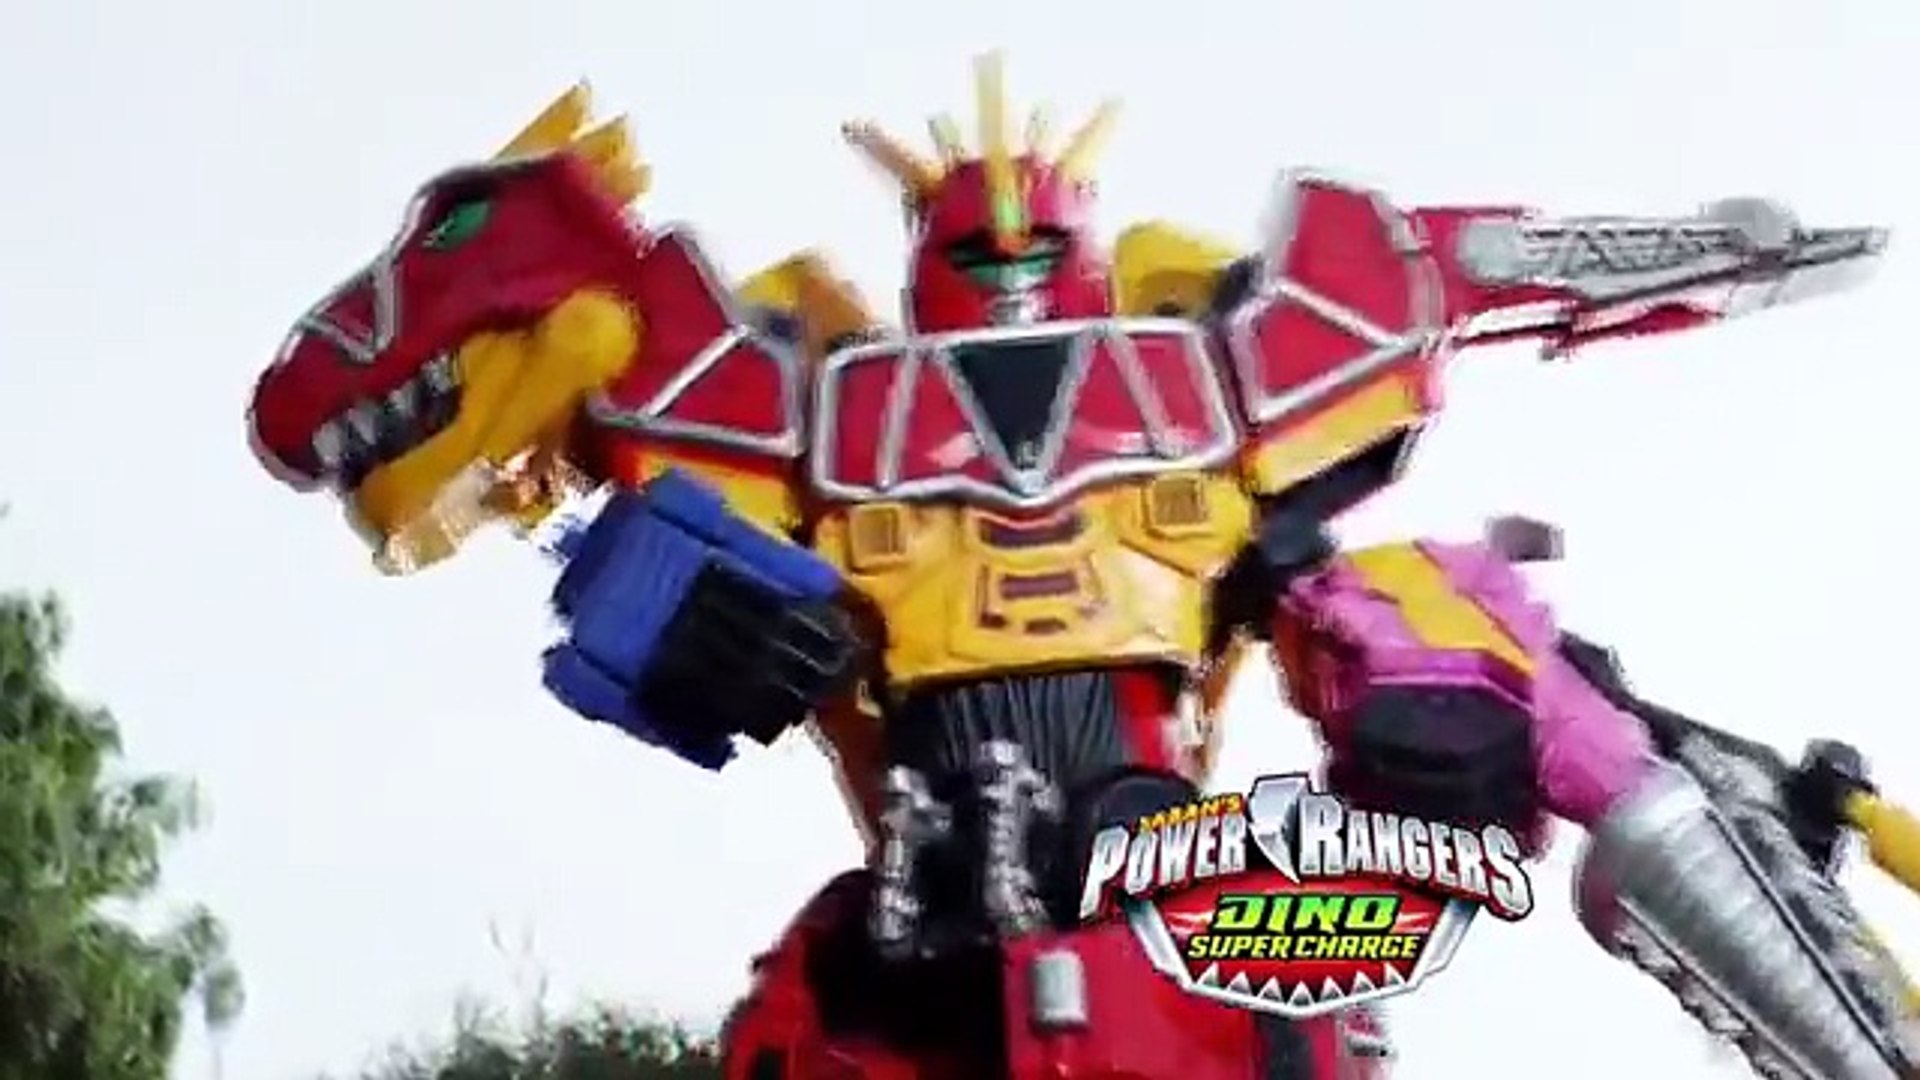 Power Rangers Dino Super Charge-Plesio charge Megazord Action Figure.